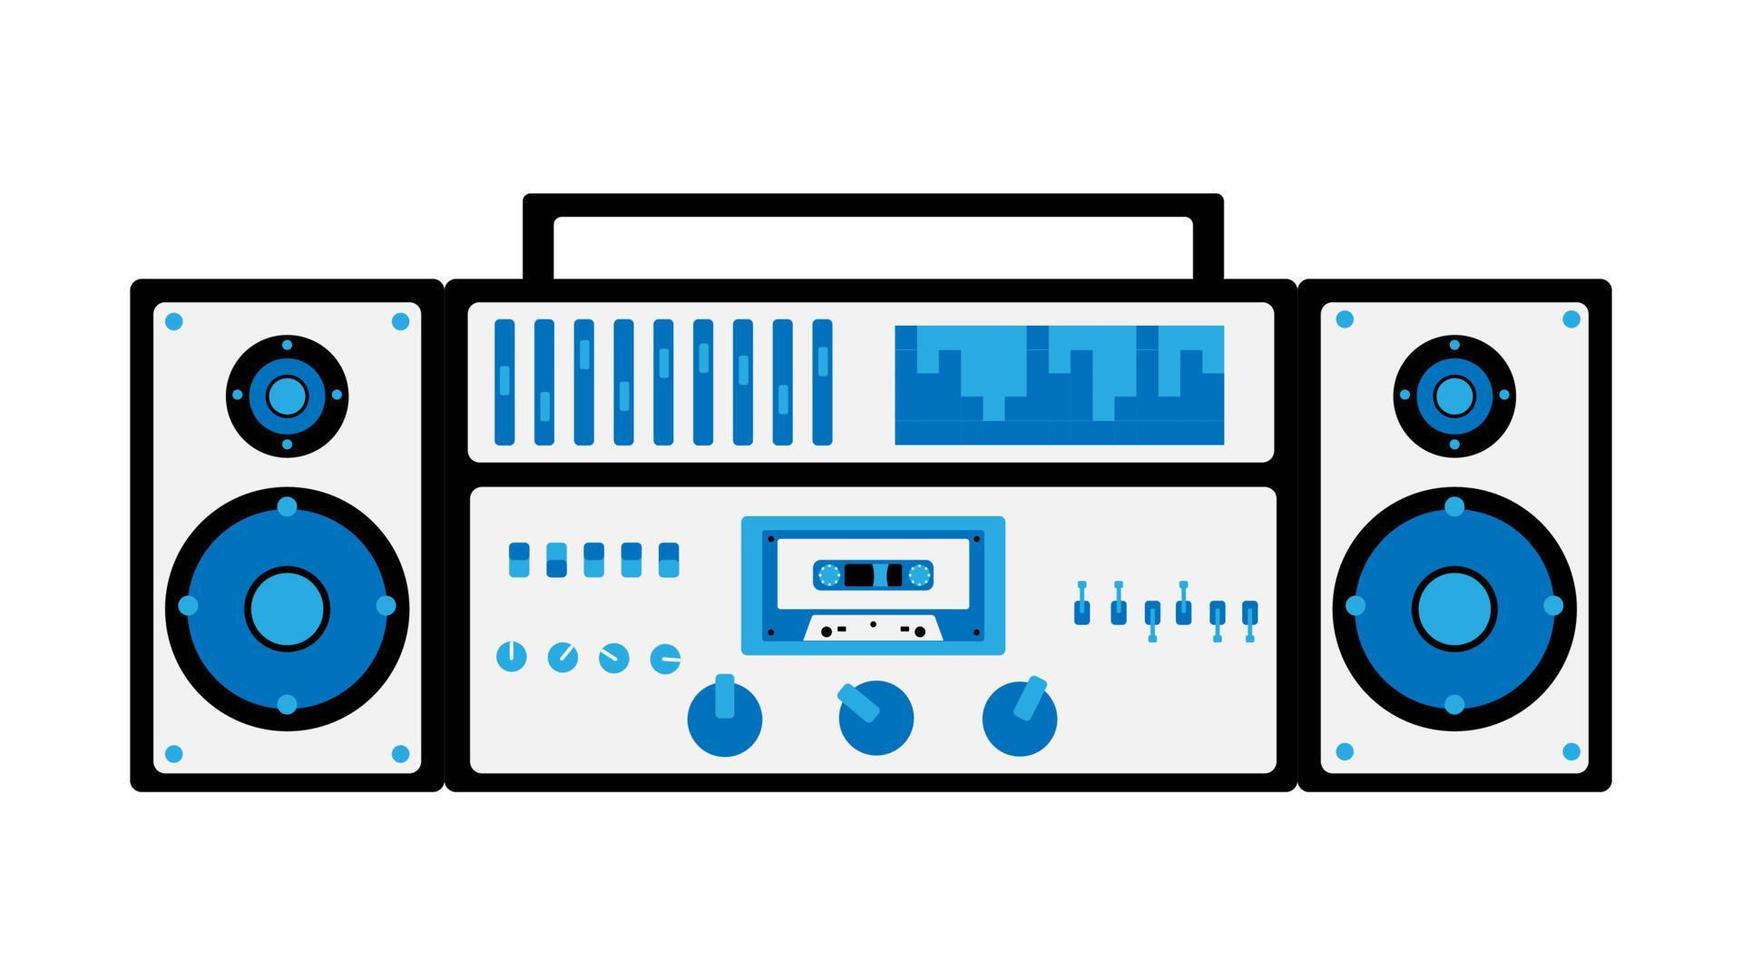 Old retro white vintage music cassette tape recorder with magnetic tape on reels and speakers from the 70s, 80s, 90s. Beautiful icon. Isolated on vhite background. Vector illustration